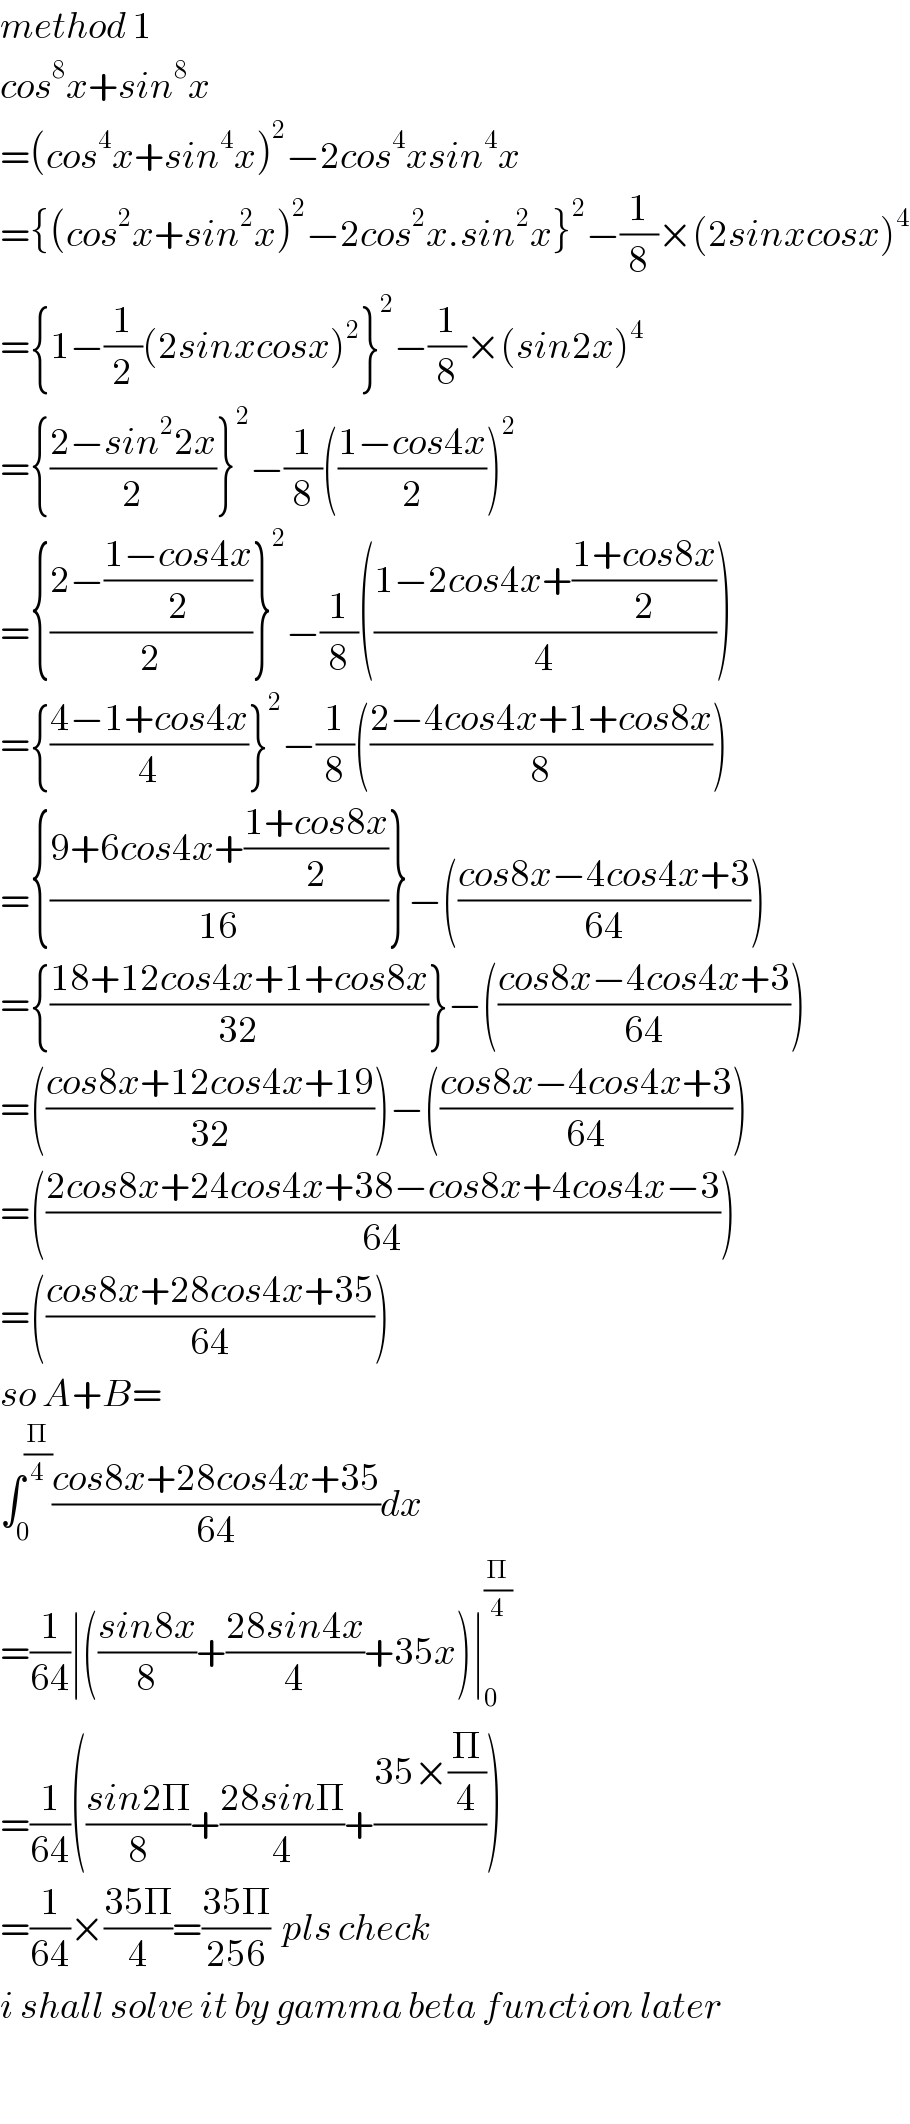 method 1  cos^8 x+sin^8 x  =(cos^4 x+sin^4 x)^2 −2cos^4 xsin^4 x  ={(cos^2 x+sin^2 x)^2 −2cos^2 x.sin^2 x}^2 −(1/8)×(2sinxcosx)^4   ={1−(1/2)(2sinxcosx)^2 }^2 −(1/8)×(sin2x)^4   ={((2−sin^2 2x)/2)}^2 −(1/8)(((1−cos4x)/2))^2   ={((2−((1−cos4x)/2))/2)}^2 −(1/8)(((1−2cos4x+((1+cos8x)/2))/4))  ={((4−1+cos4x)/4)}^2 −(1/8)(((2−4cos4x+1+cos8x)/8))  ={((9+6cos4x+((1+cos8x)/2))/(16))}−(((cos8x−4cos4x+3)/(64)))  ={((18+12cos4x+1+cos8x)/(32))}−(((cos8x−4cos4x+3)/(64)))  =(((cos8x+12cos4x+19)/(32)))−(((cos8x−4cos4x+3)/(64)))  =(((2cos8x+24cos4x+38−cos8x+4cos4x−3)/(64)))  =(((cos8x+28cos4x+35)/(64)))  so A+B=  ∫_0 ^(Π/4) ((cos8x+28cos4x+35)/(64))dx  =(1/(64))∣(((sin8x)/8)+((28sin4x)/4)+35x)∣_0 ^(Π/4)   =(1/(64))(((sin2Π)/8)+((28sinΠ)/4)+((35×(Π/4))/))  =(1/(64))×((35Π)/4)=((35Π)/(256))  pls check  i shall solve it by gamma beta function later    